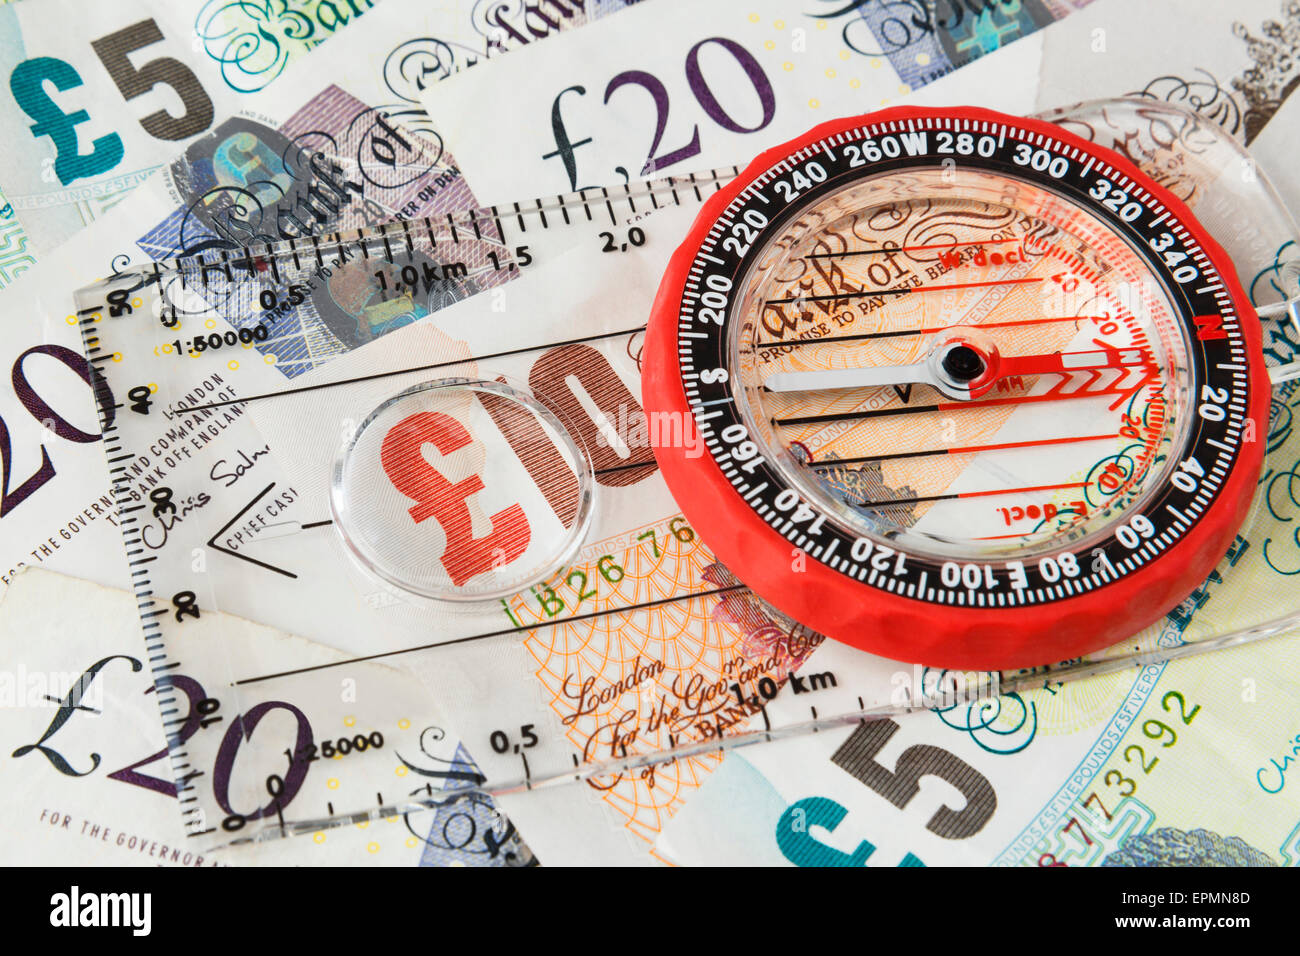 Compass focus on sterling money pound notes to illustrate direction of British economy after Brexit and financial growth concept. England UK Britain Stock Photo